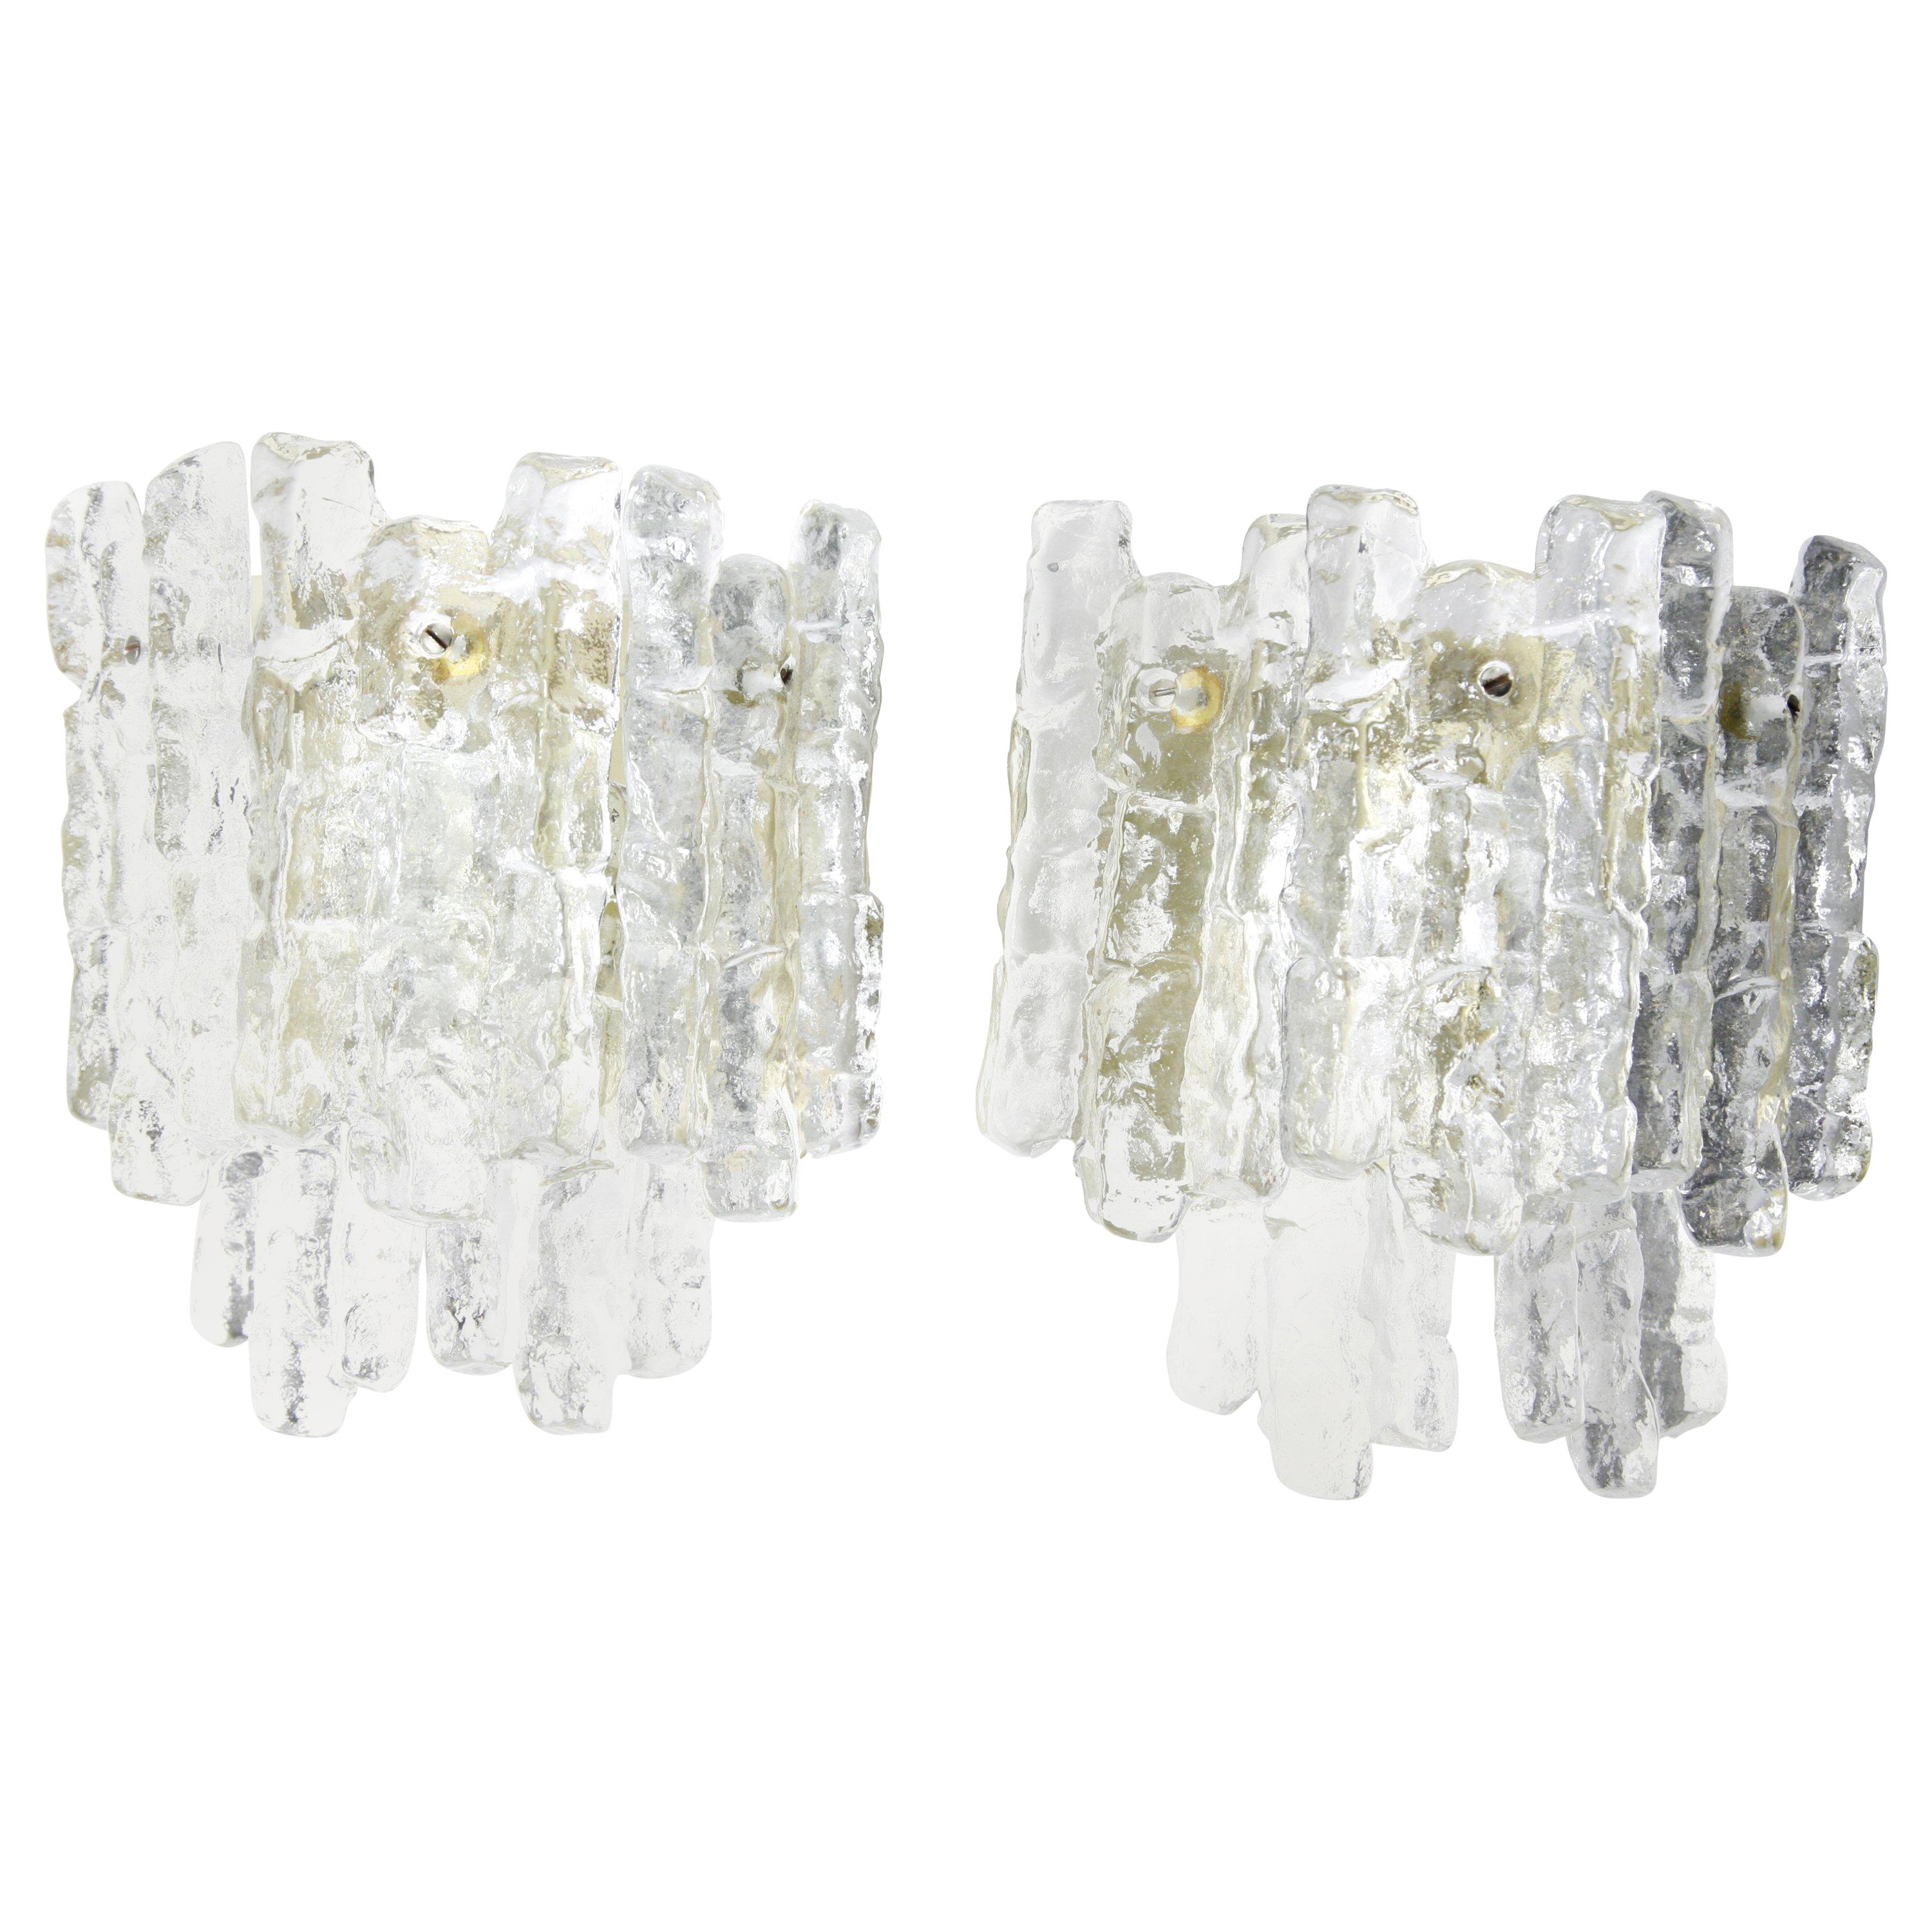 Pair of Large Kalmar Wall Lights Ice Glass, 1970s, Vienna, Austria For Sale